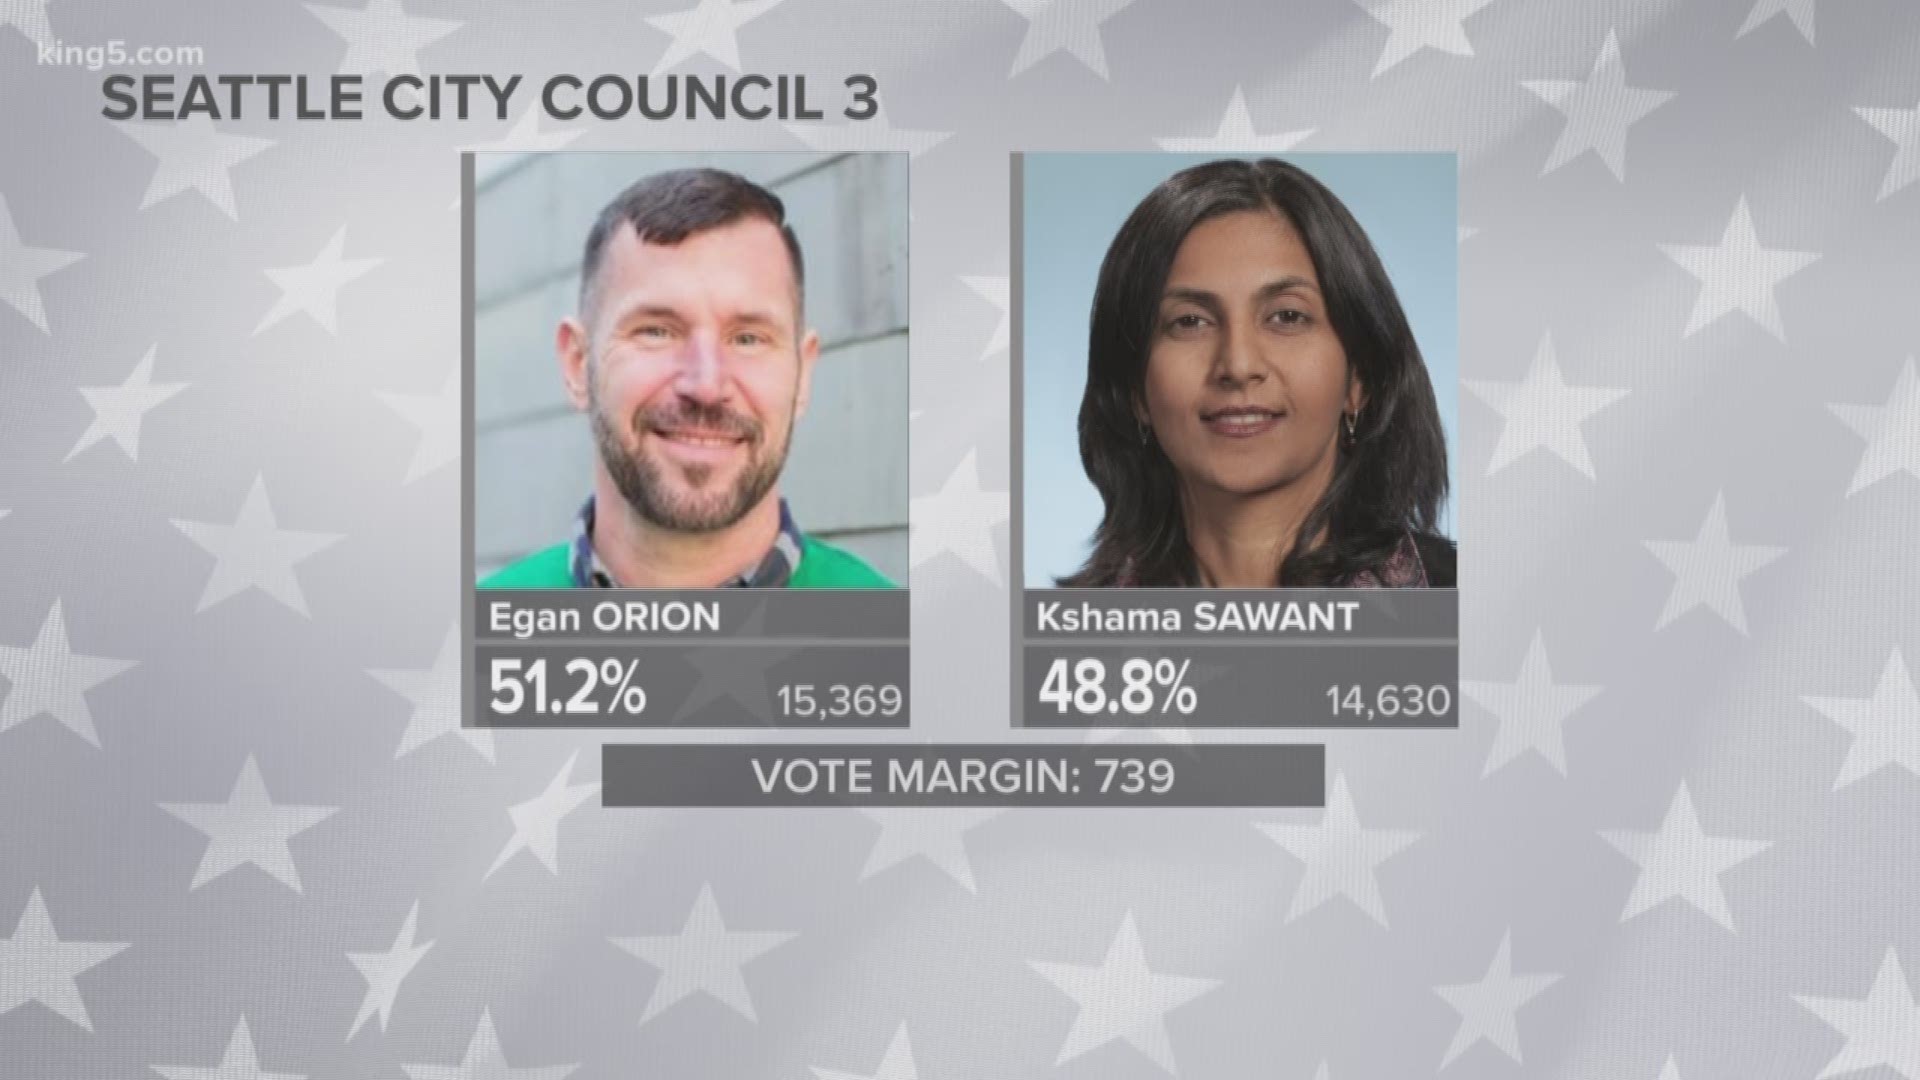 Seattle City Council election results after 3rd round released